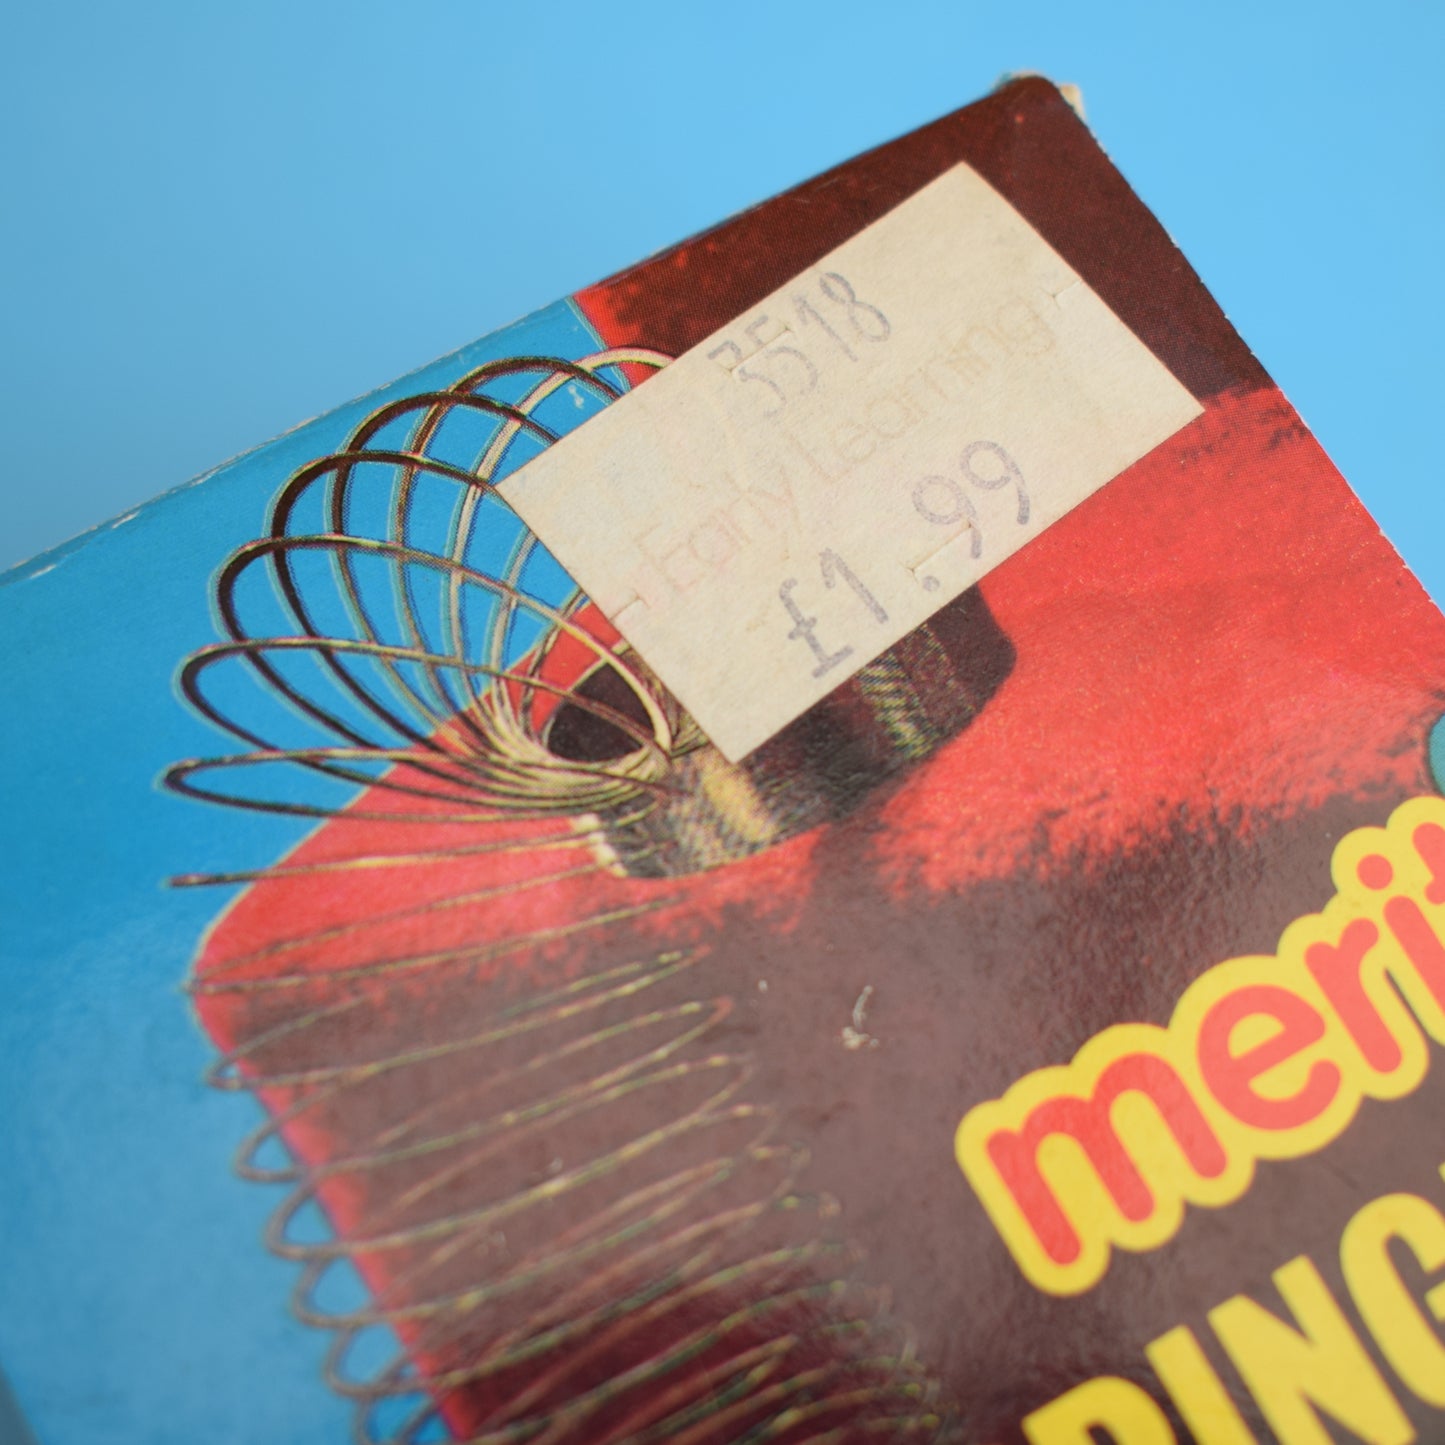 Vintage 1970s Original Slinky Style Toy- Boxed